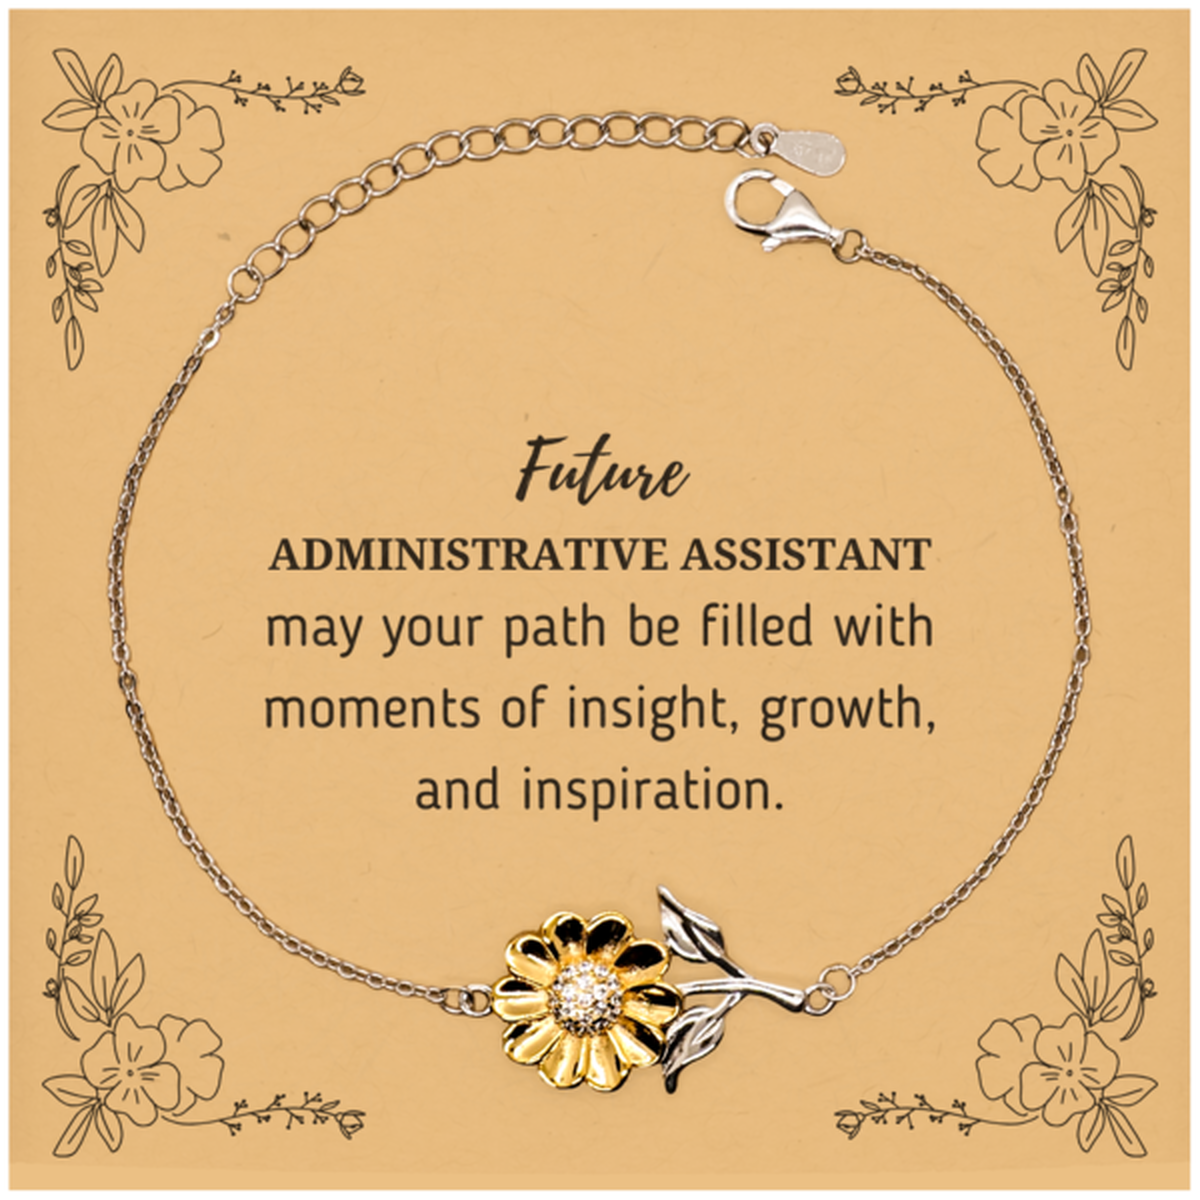 Future Administrative Assistant Gifts, May your path be filled with moments of insight, Graduation Gifts for New Administrative Assistant, Christmas Unique Sunflower Bracelet For Men, Women, Friends